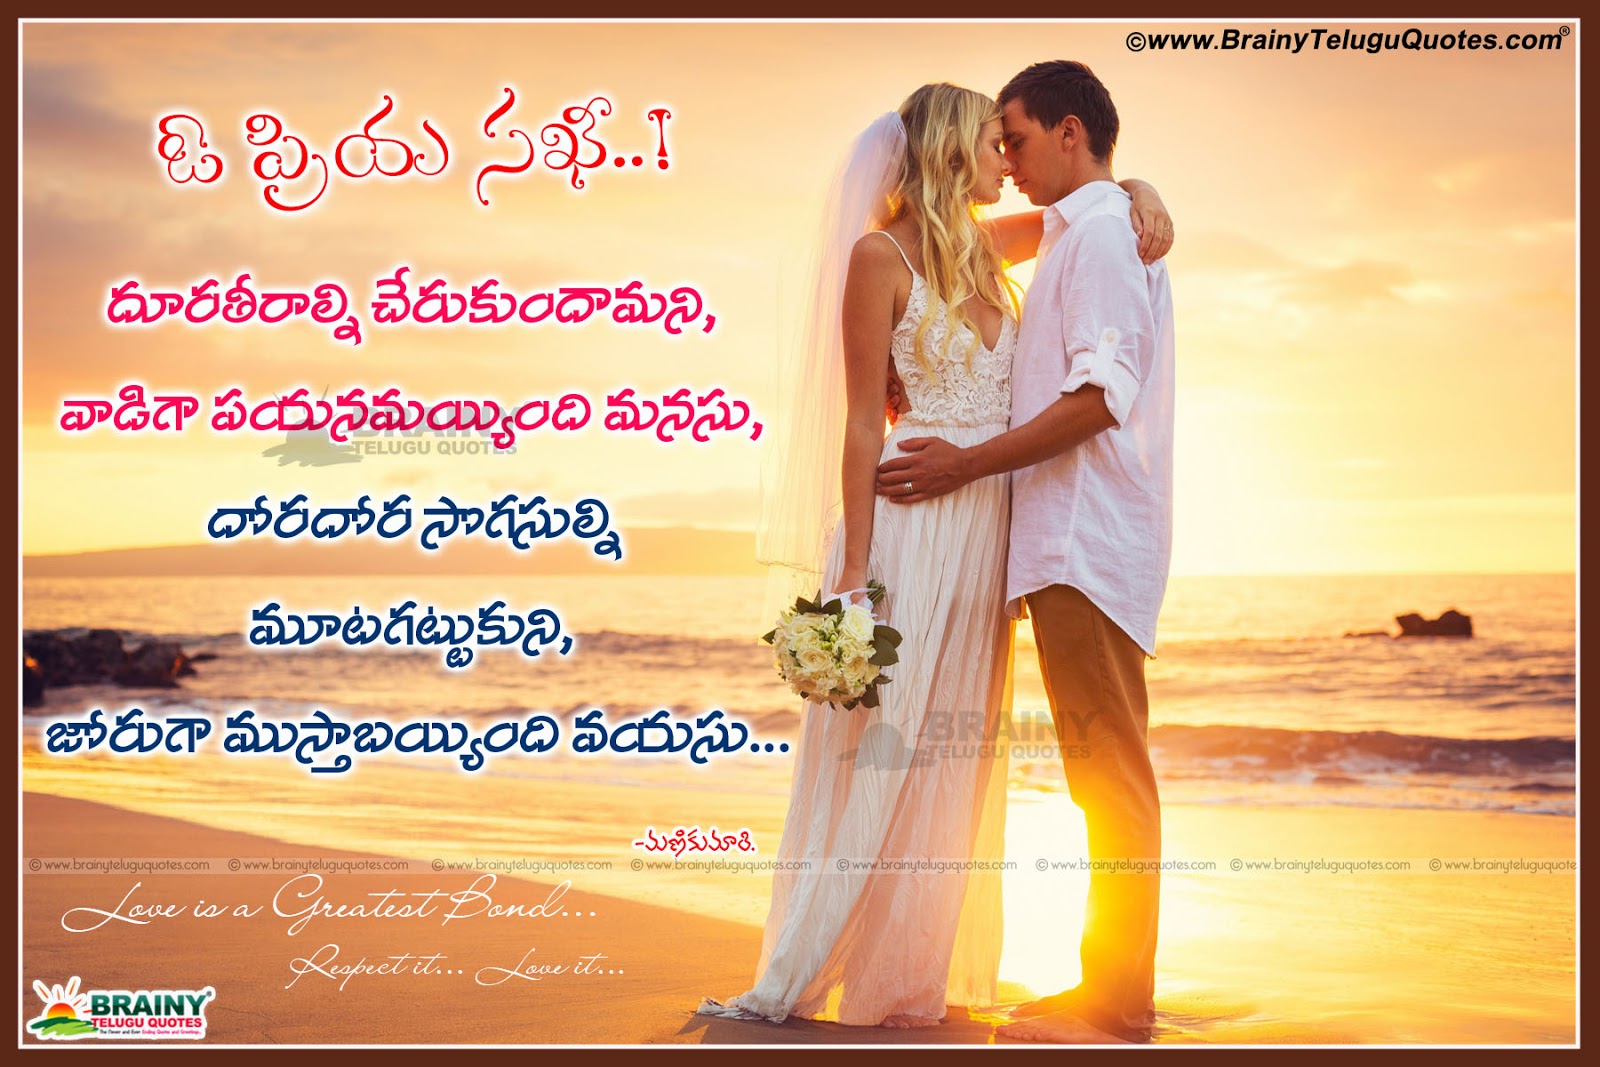 Telugu new latest love quotes for boy girl and lovers Best amazing love quotes in Telugu language with Telugu font Download these latest Love Telugu